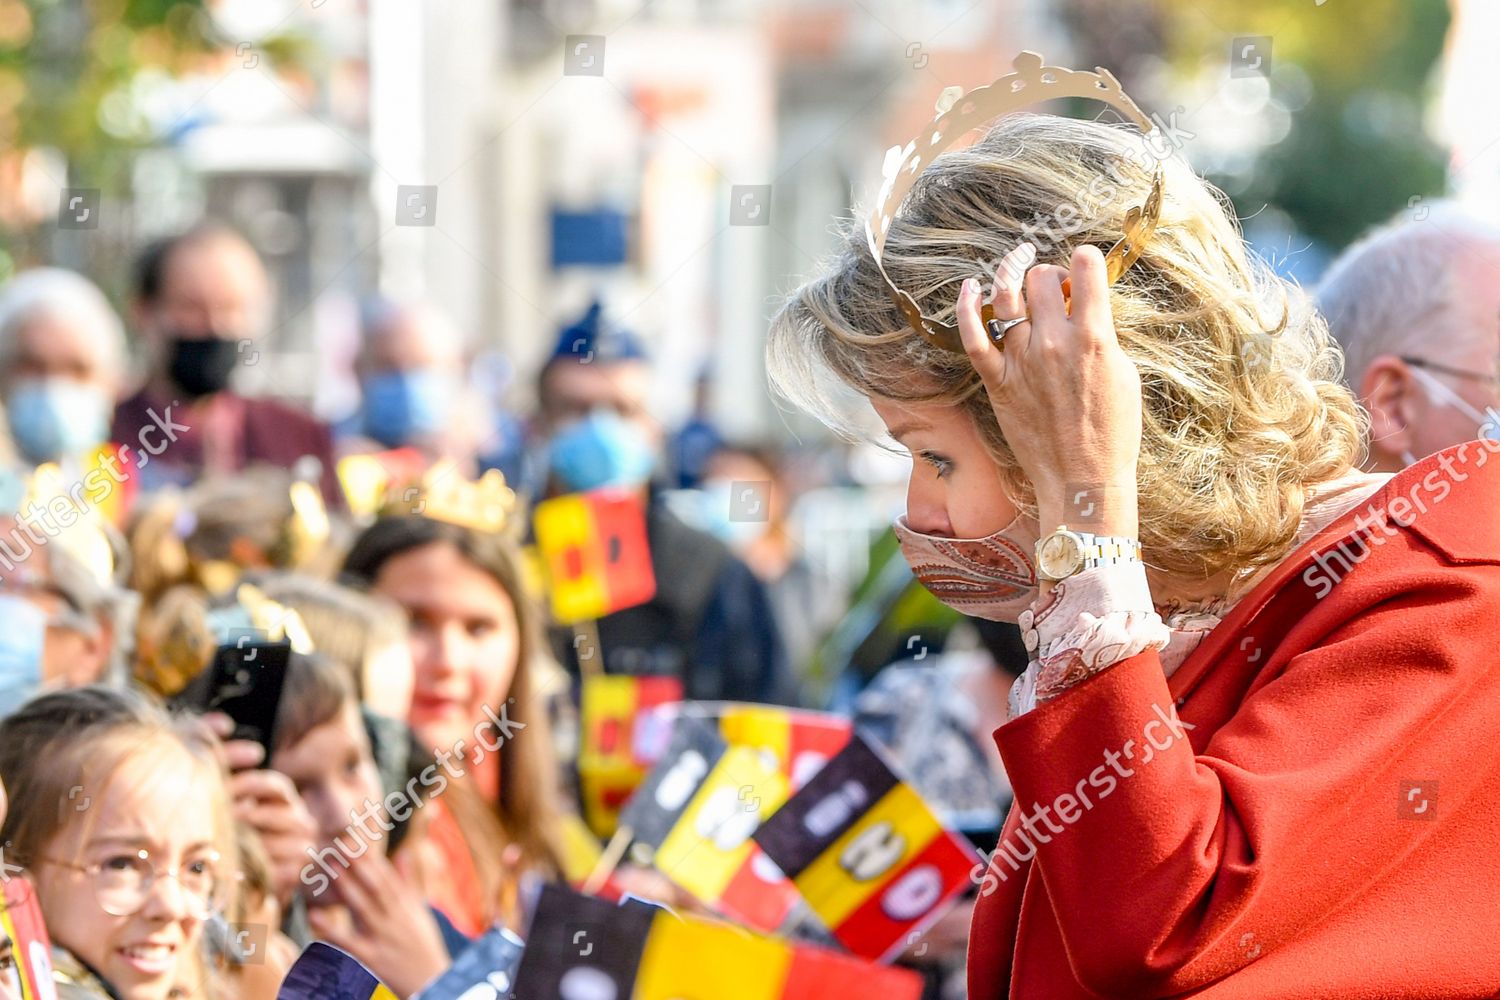 queen-mathilde-and-king-philippe-visit-the-province-of-luxembourg-vielsalm-belgium-shutterstock-editorial-12529850al.jpg